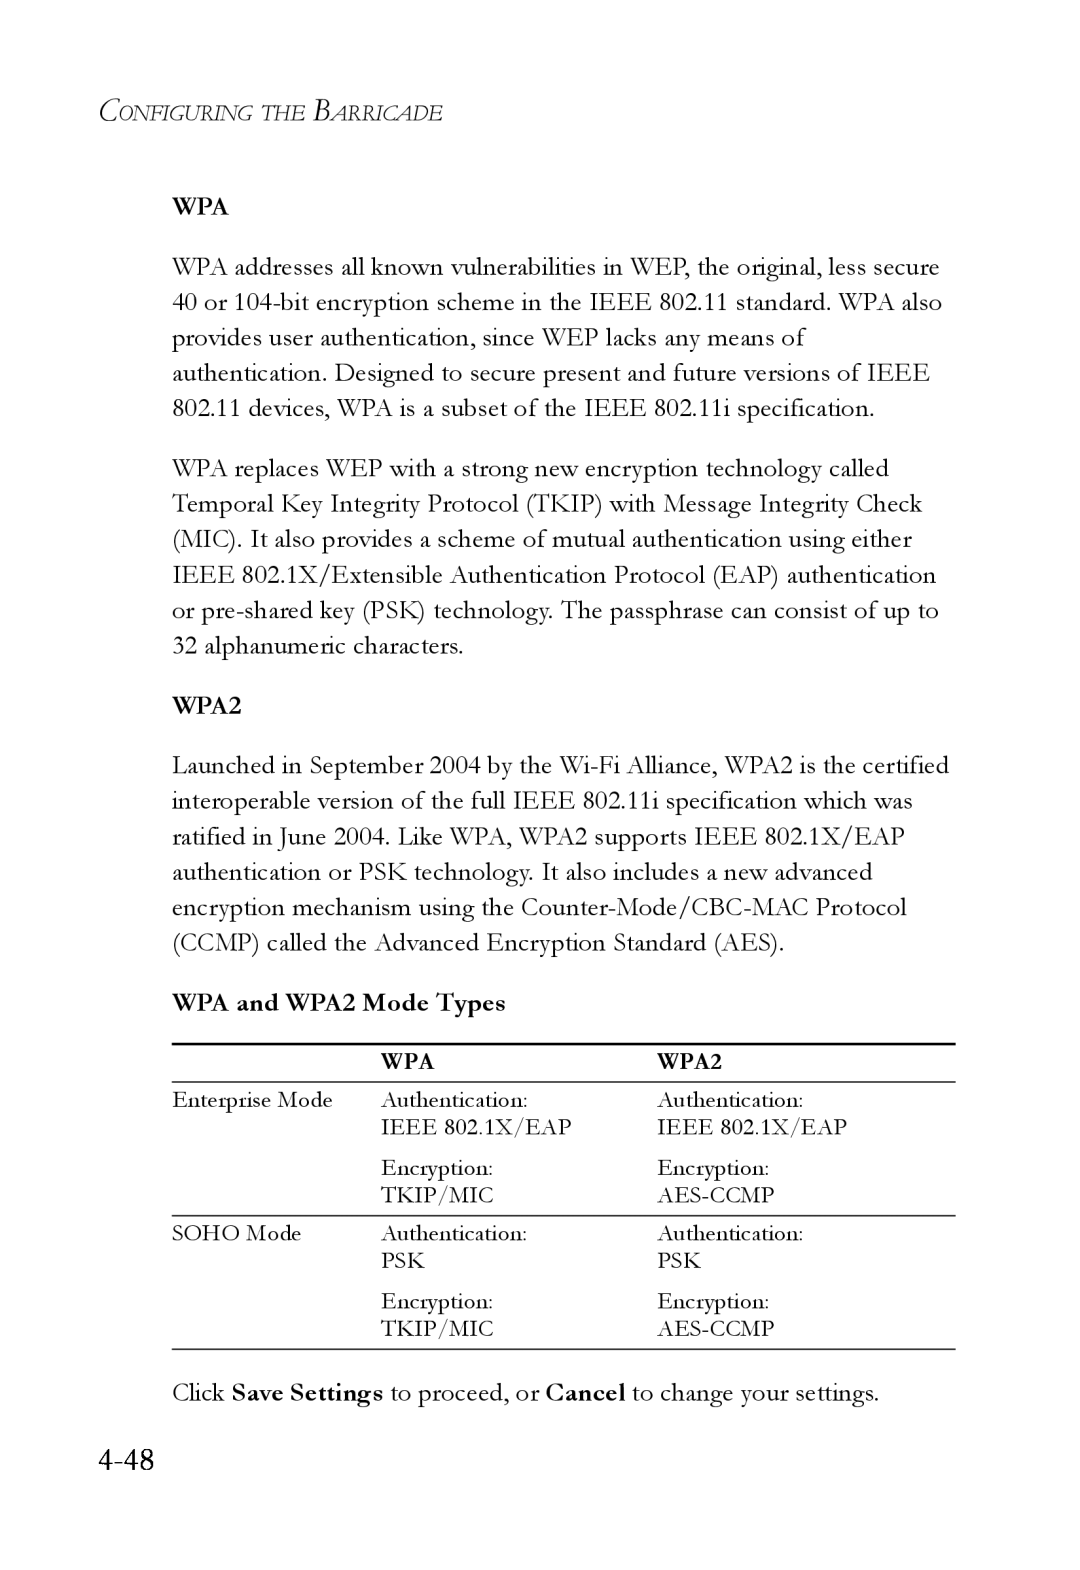 SMC Networks SMCWBR14T-G manual 4-48, WPA and WPA2 Mode Types 